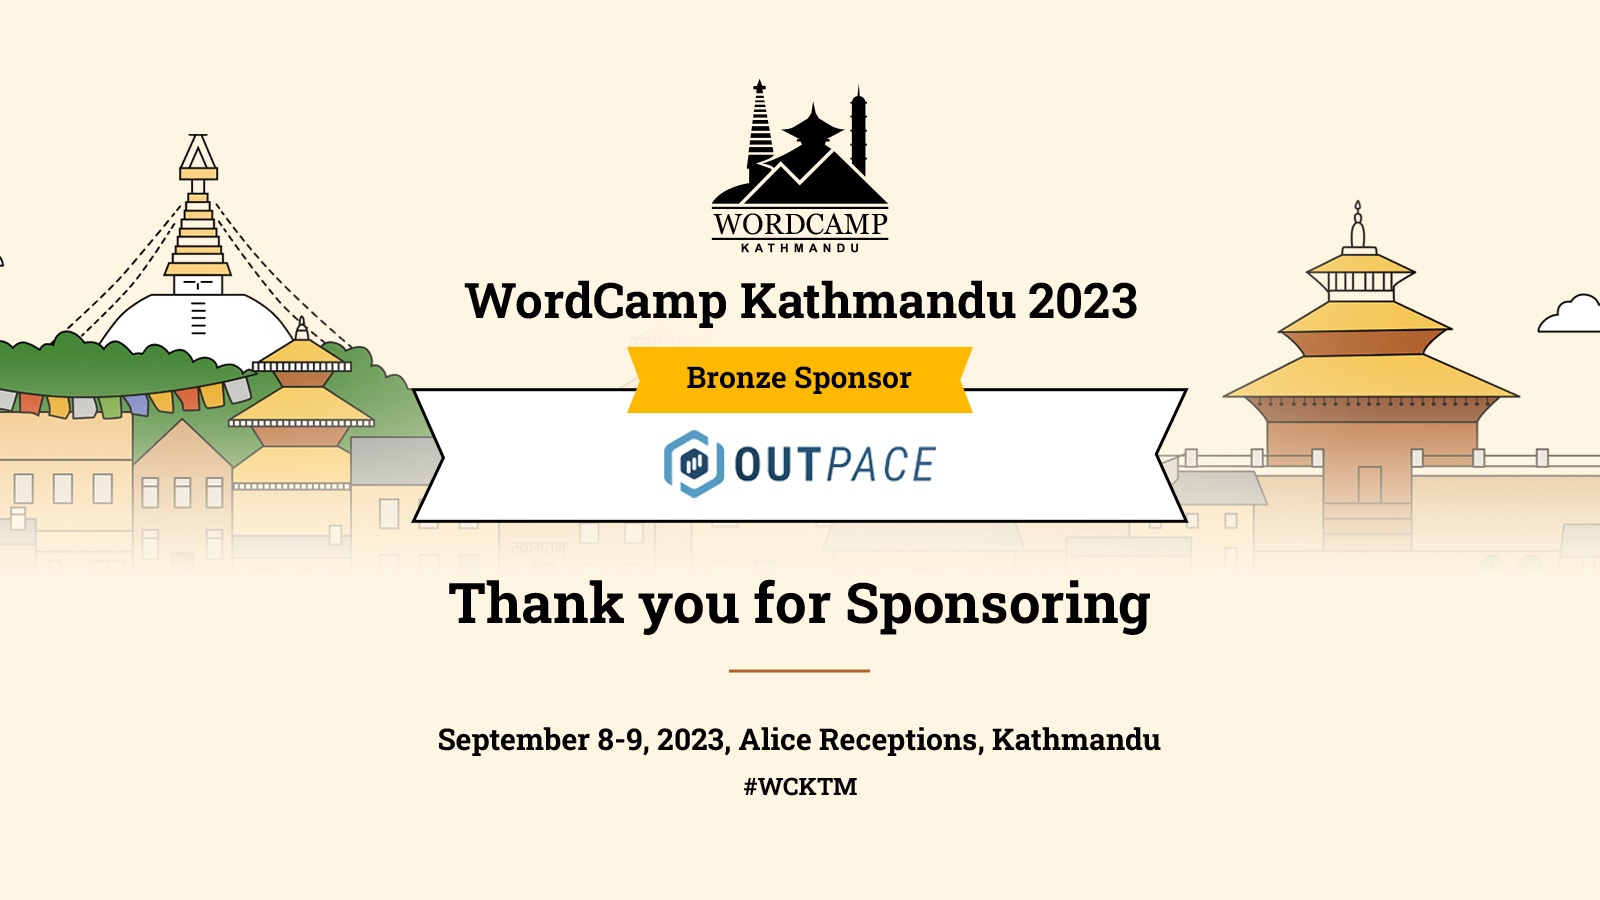 Thank you Outpace for sponsoring